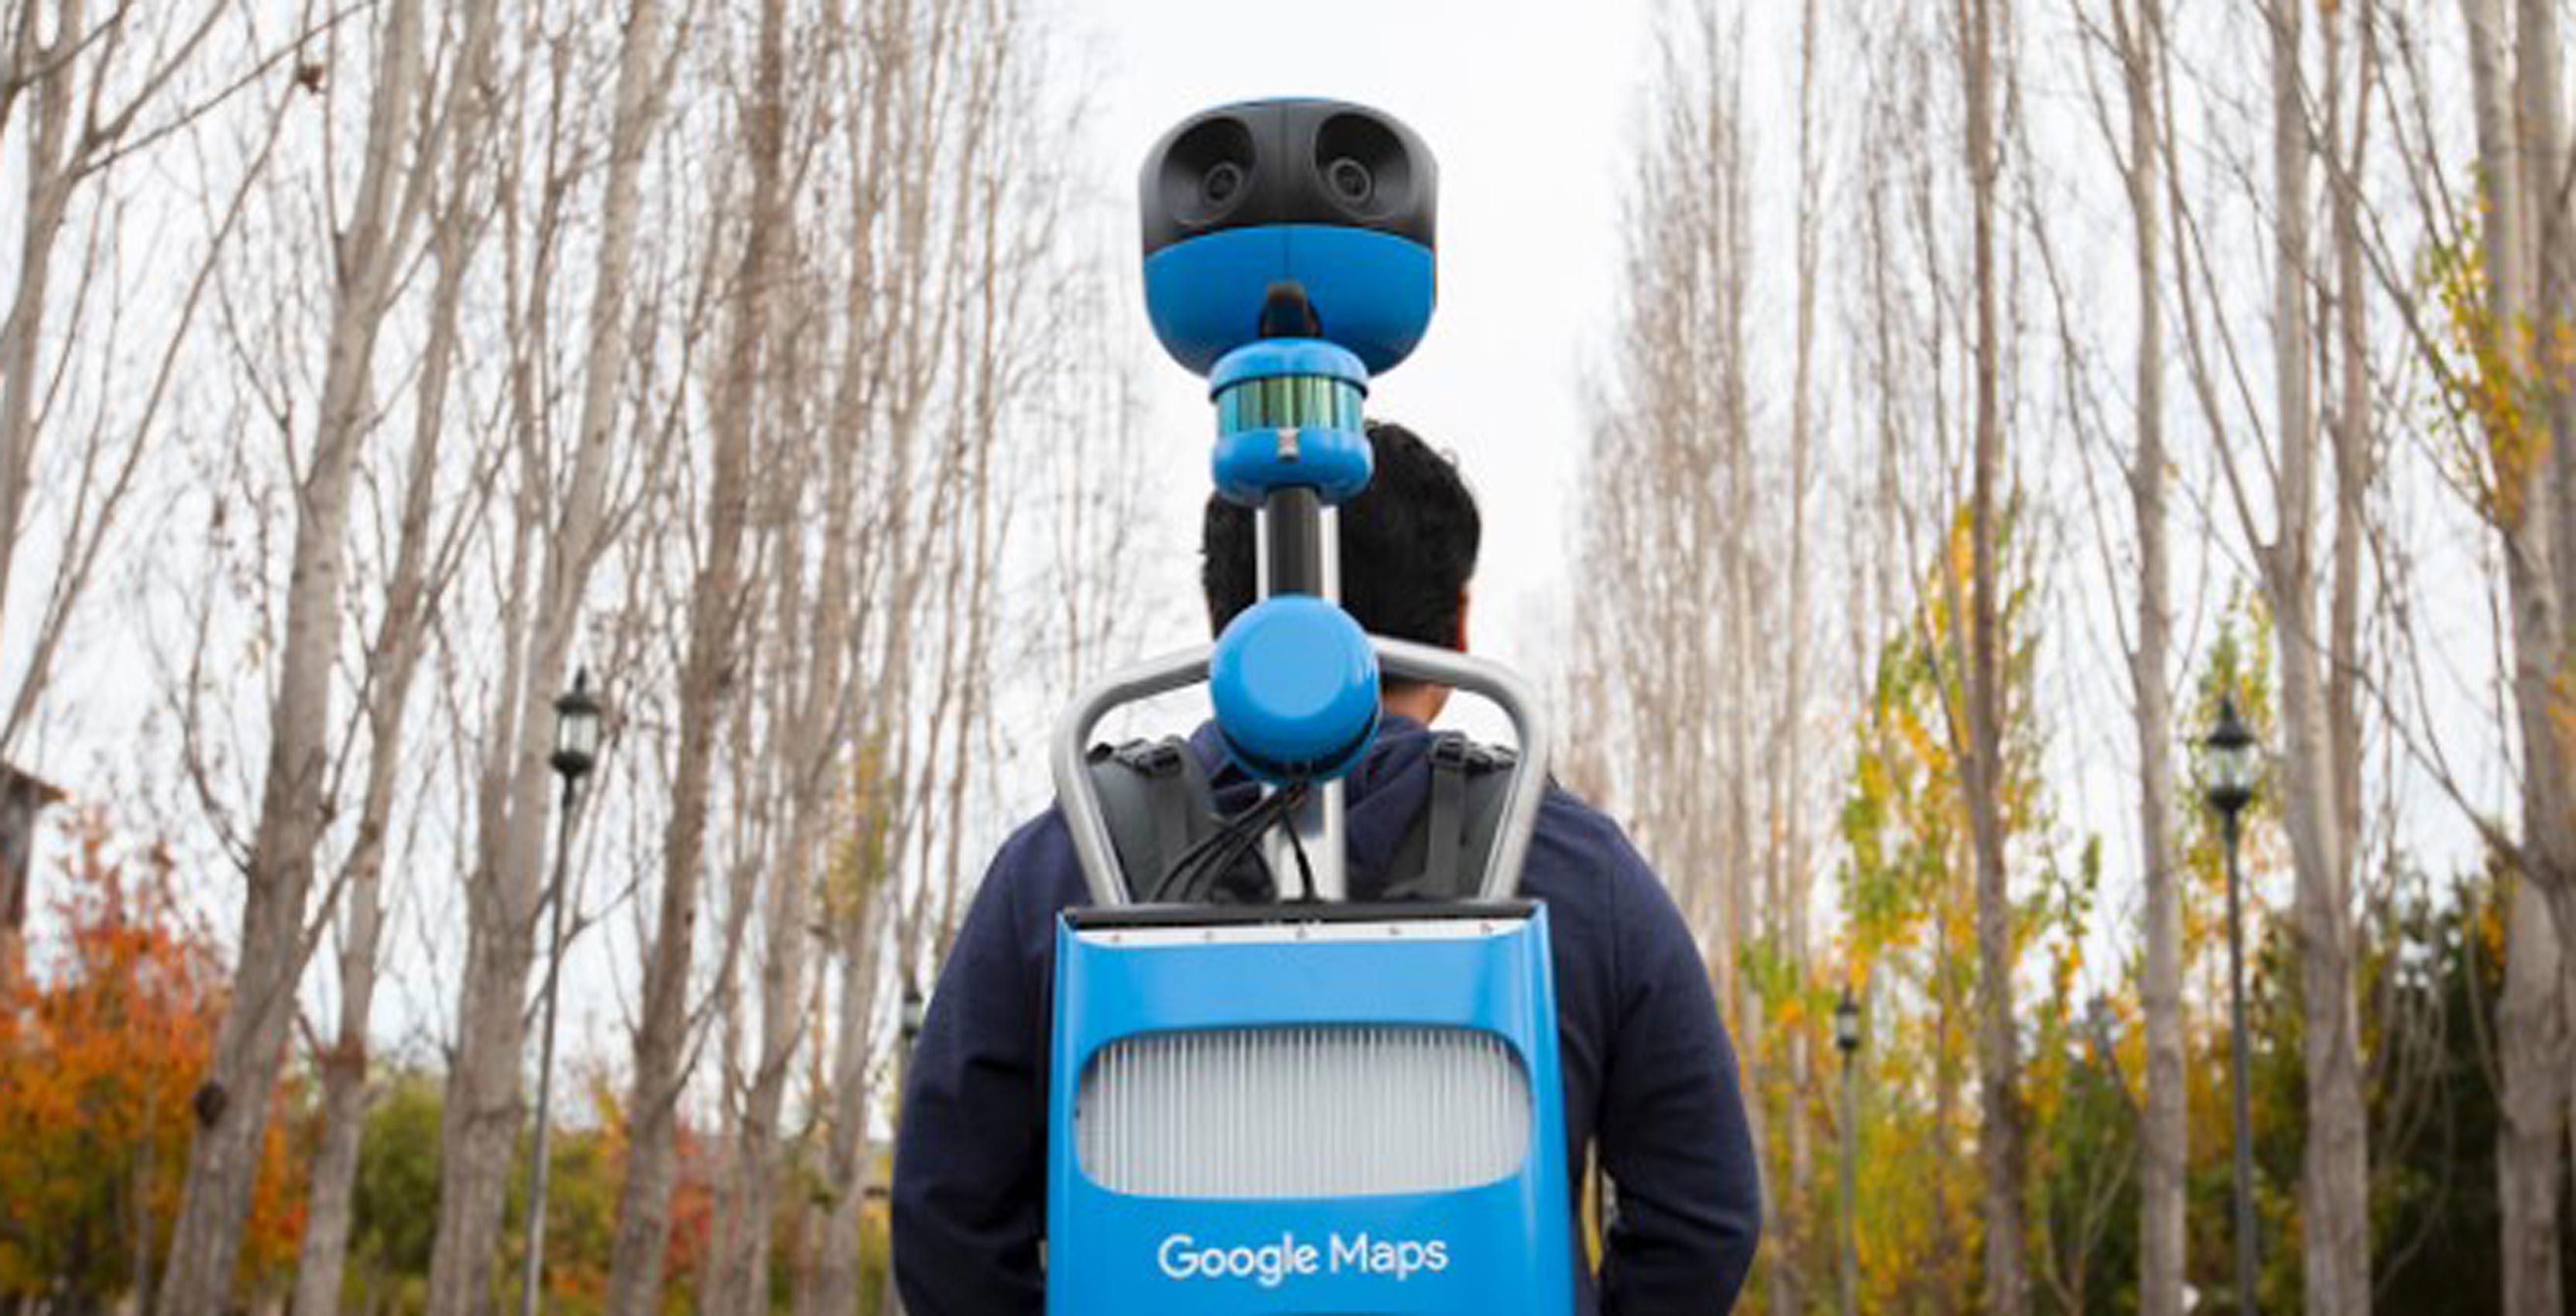 A look at the Google's new Street View Trekker